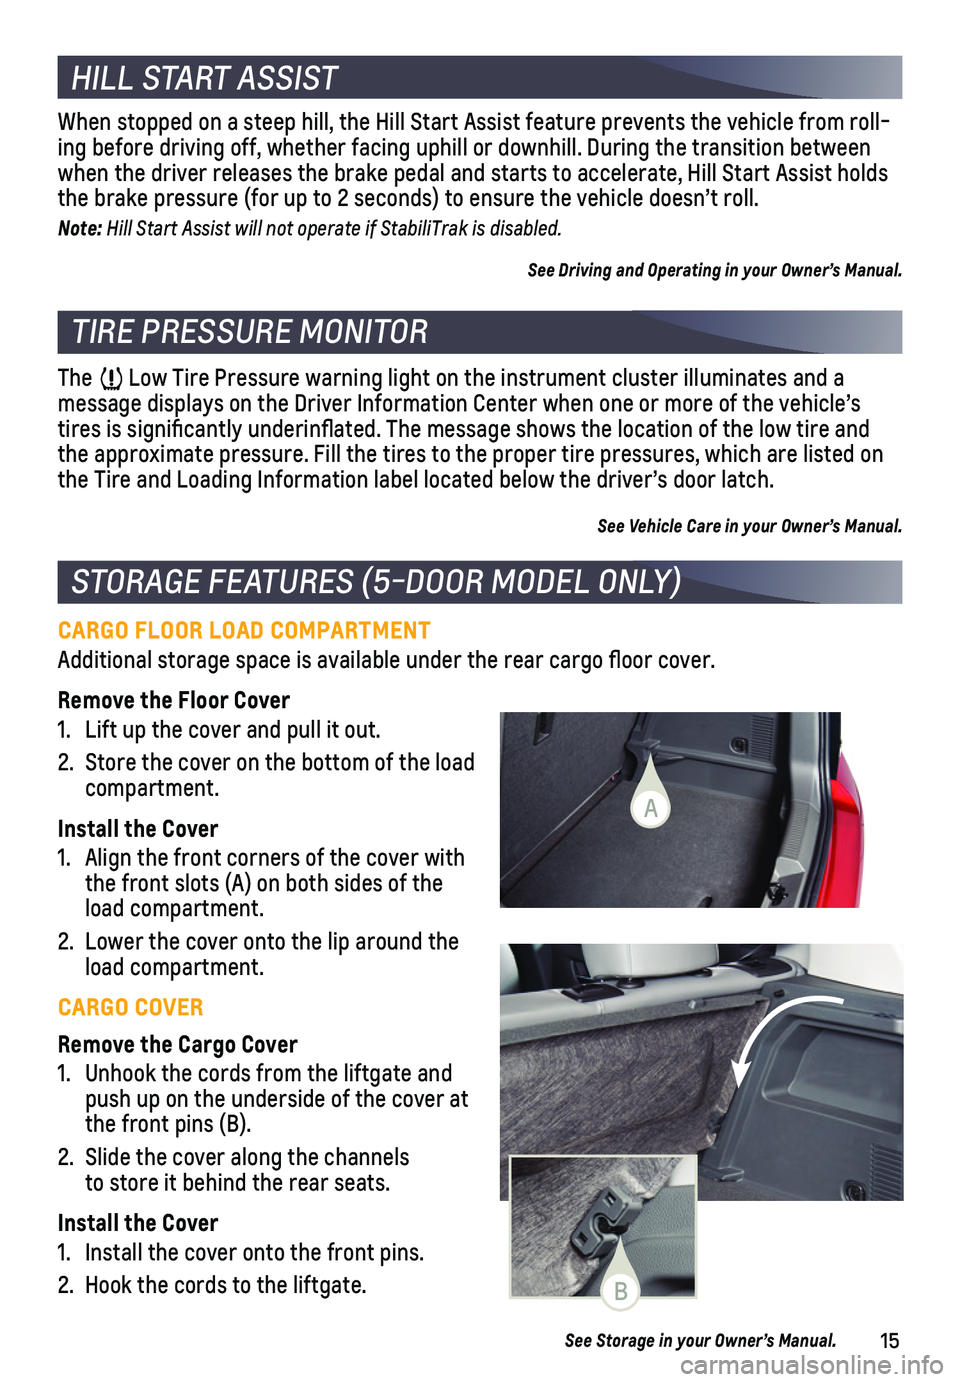 CHEVROLET SONIC 2019  Get To Know Guide 15
CARGO FLOOR LOAD COMPARTMENT
Additional storage space is available under the rear cargo floor cover\
. 
Remove the Floor Cover
1. Lift up the cover and pull it out.
2. Store the cover on the bottom